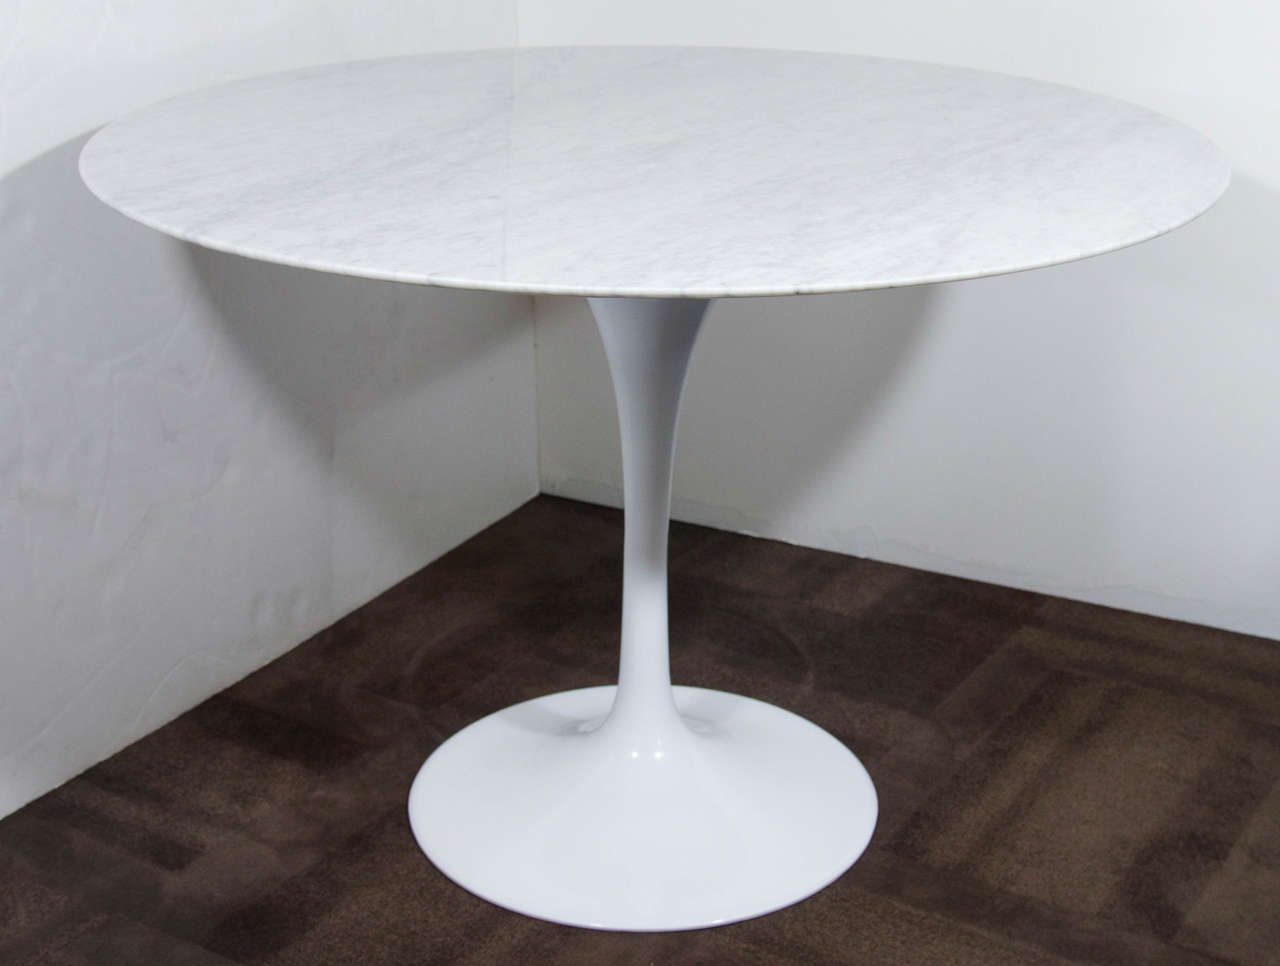 The iconic tulip dining table comprised of solid arabescato carrara marble top over a a stylized cast metal base in a white gloss enamel finish. Round polished white marble with subtle streaks of pale grey. Excellent scale for eat in kitchens,